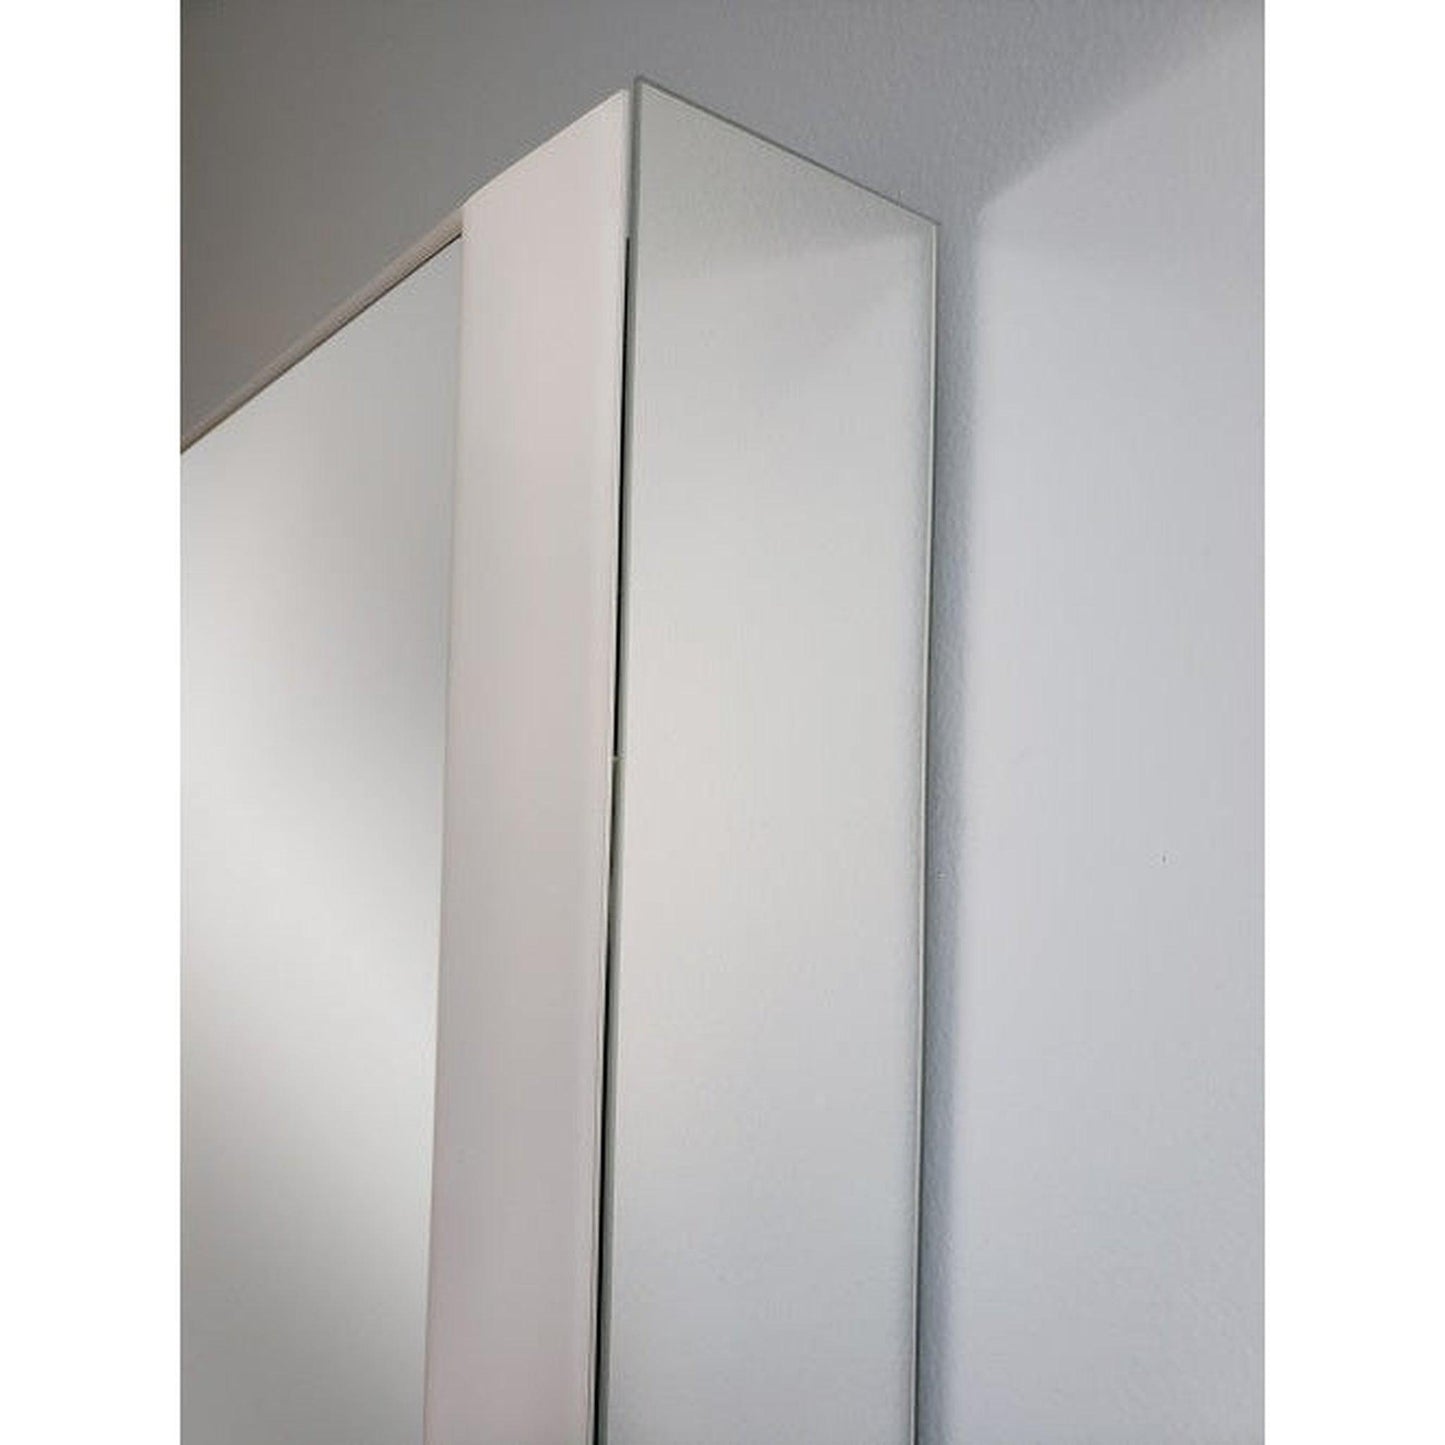 Sidler Quadro 47" x 36" 3000K Double Mirror Doors Anodized Aluminum Medicine Cabinet With Night Light Function, Built-in GFCI Outlet and USB port